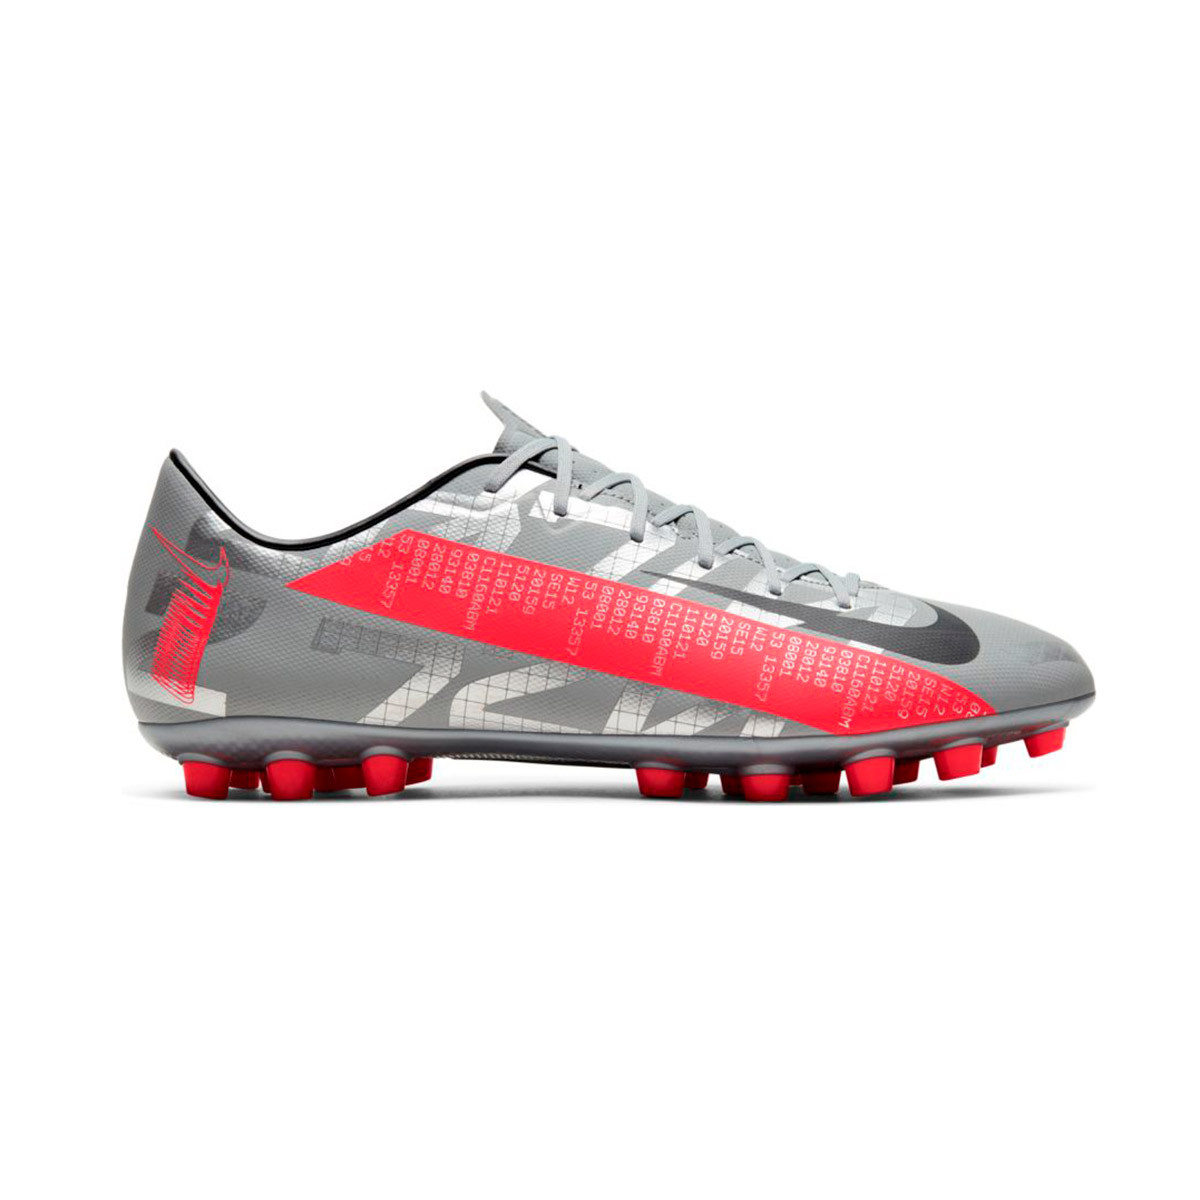 Nike Superfly 7 Academy MDS FG MG 6pm